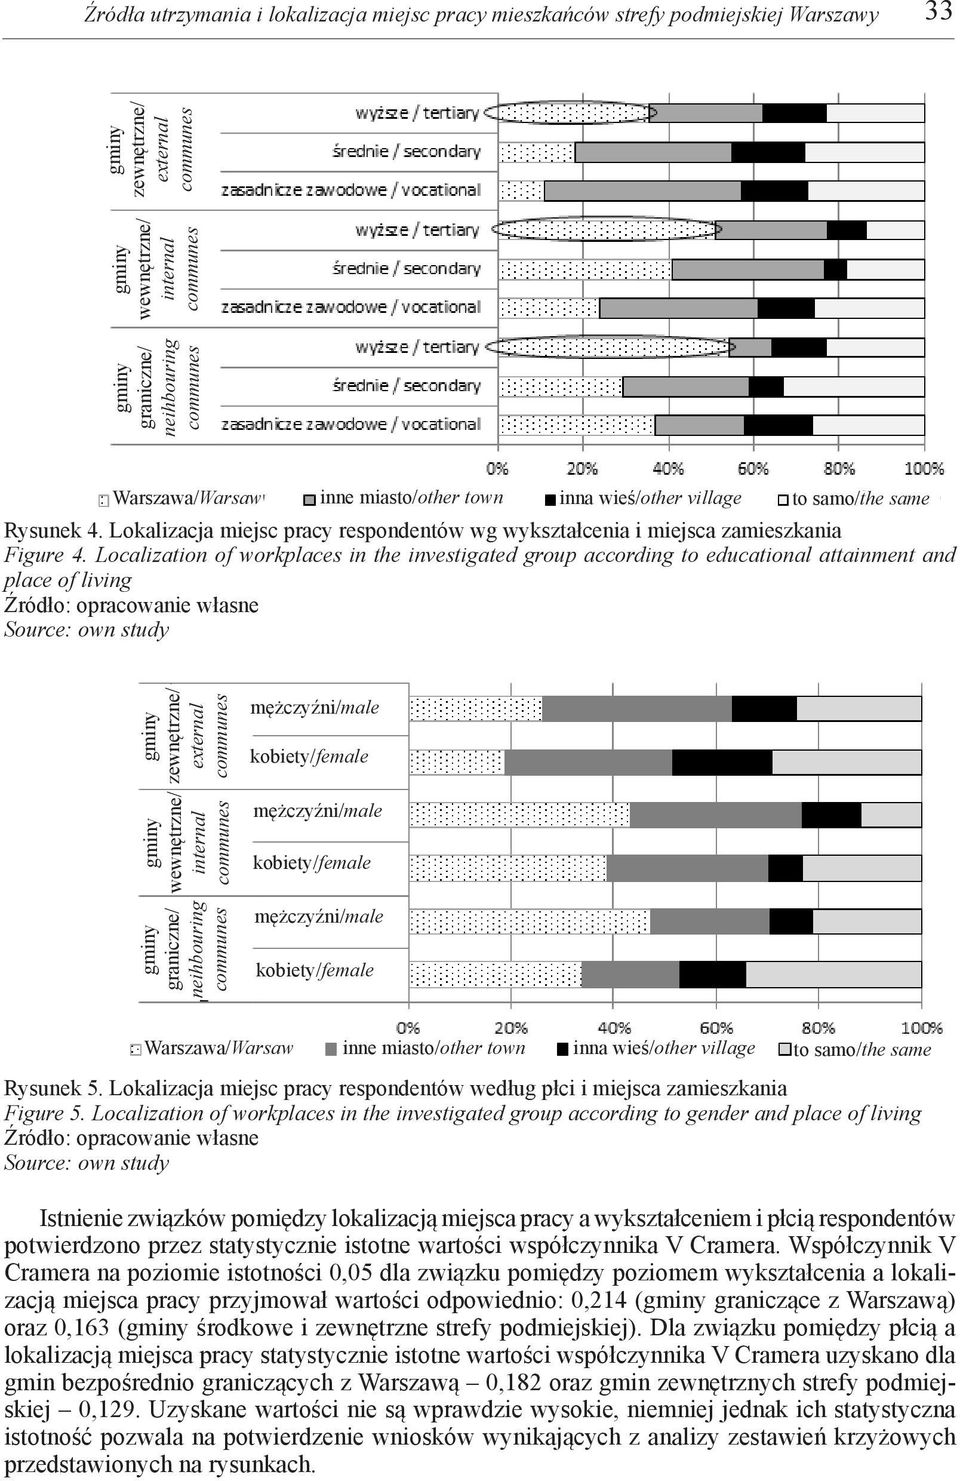 Localization of workplaces in the investigated group according to educational attainment and place of living zewnętrzne/ external wewnętrzne/ internal graniczne/ neihbouring Rysunek 5.